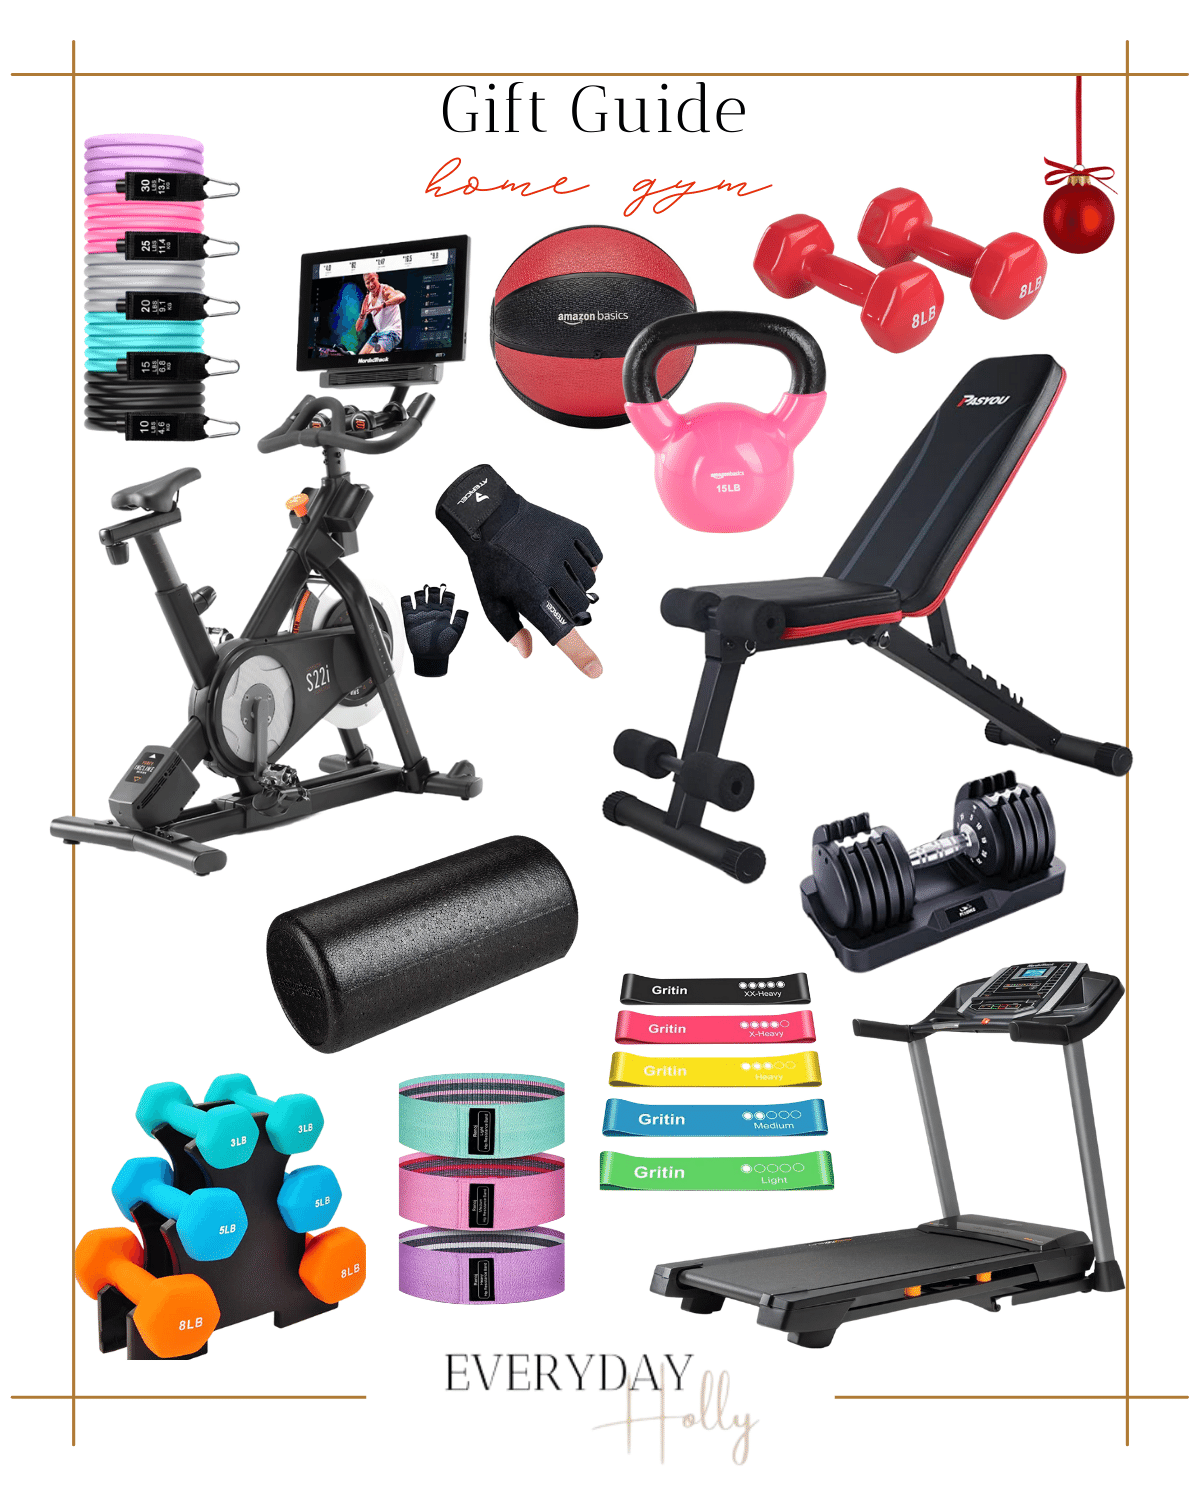 gift guides, home gym gifting ideas, christmas gifts, resistance bands, home bike, medicine ball, kettlebell, dumbbells, weight bench, foam roller, booty bands, treadmill